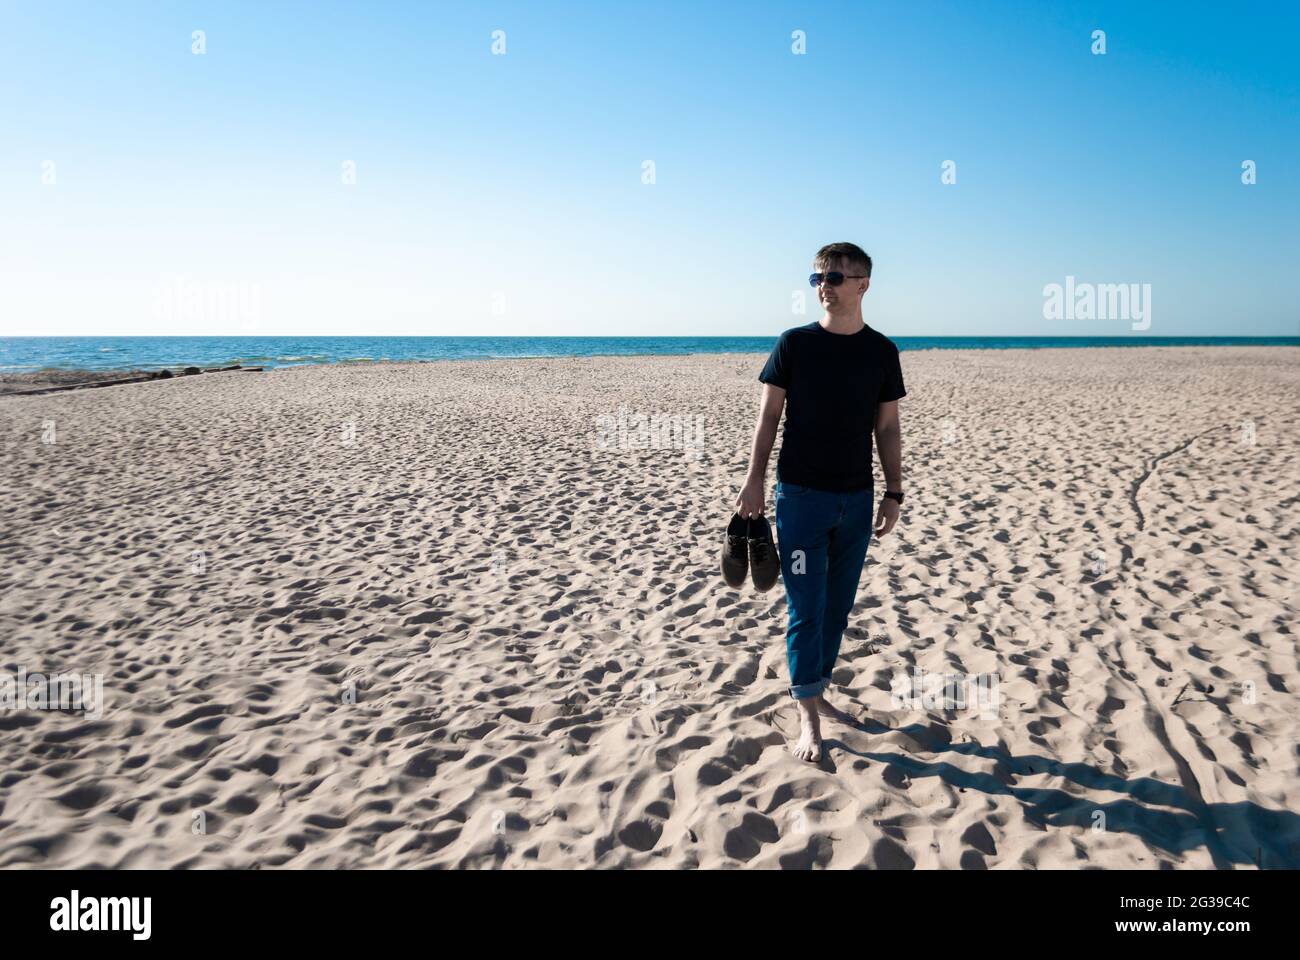 Man in casual wear, glasses stands on beach and holds shoes in hand Stock Photo